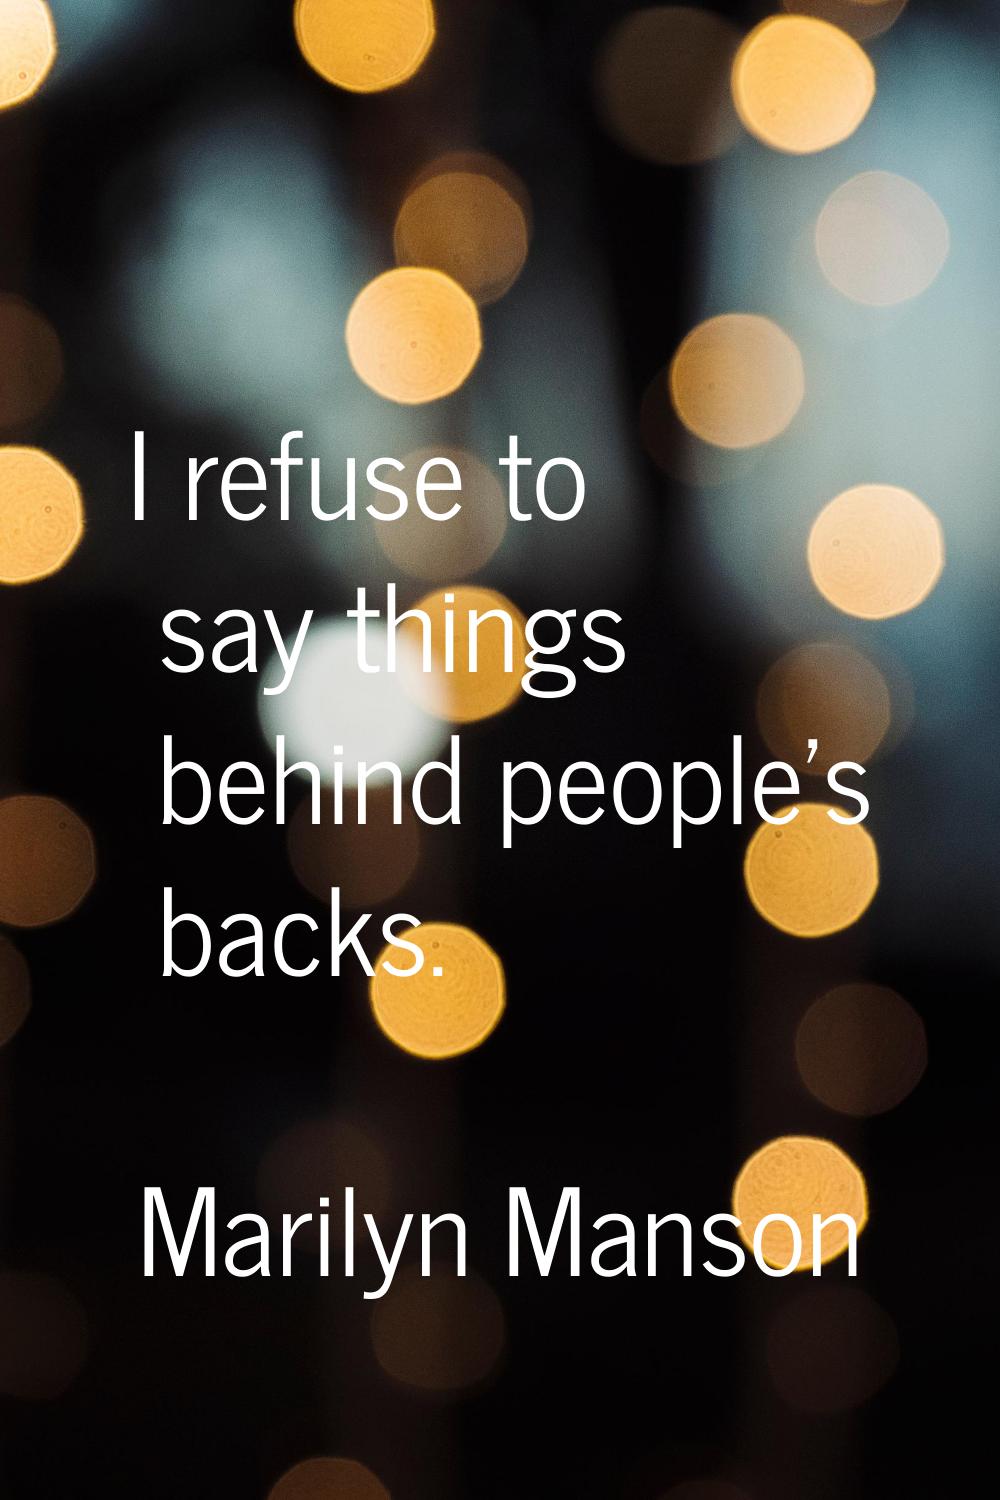 I refuse to say things behind people's backs.